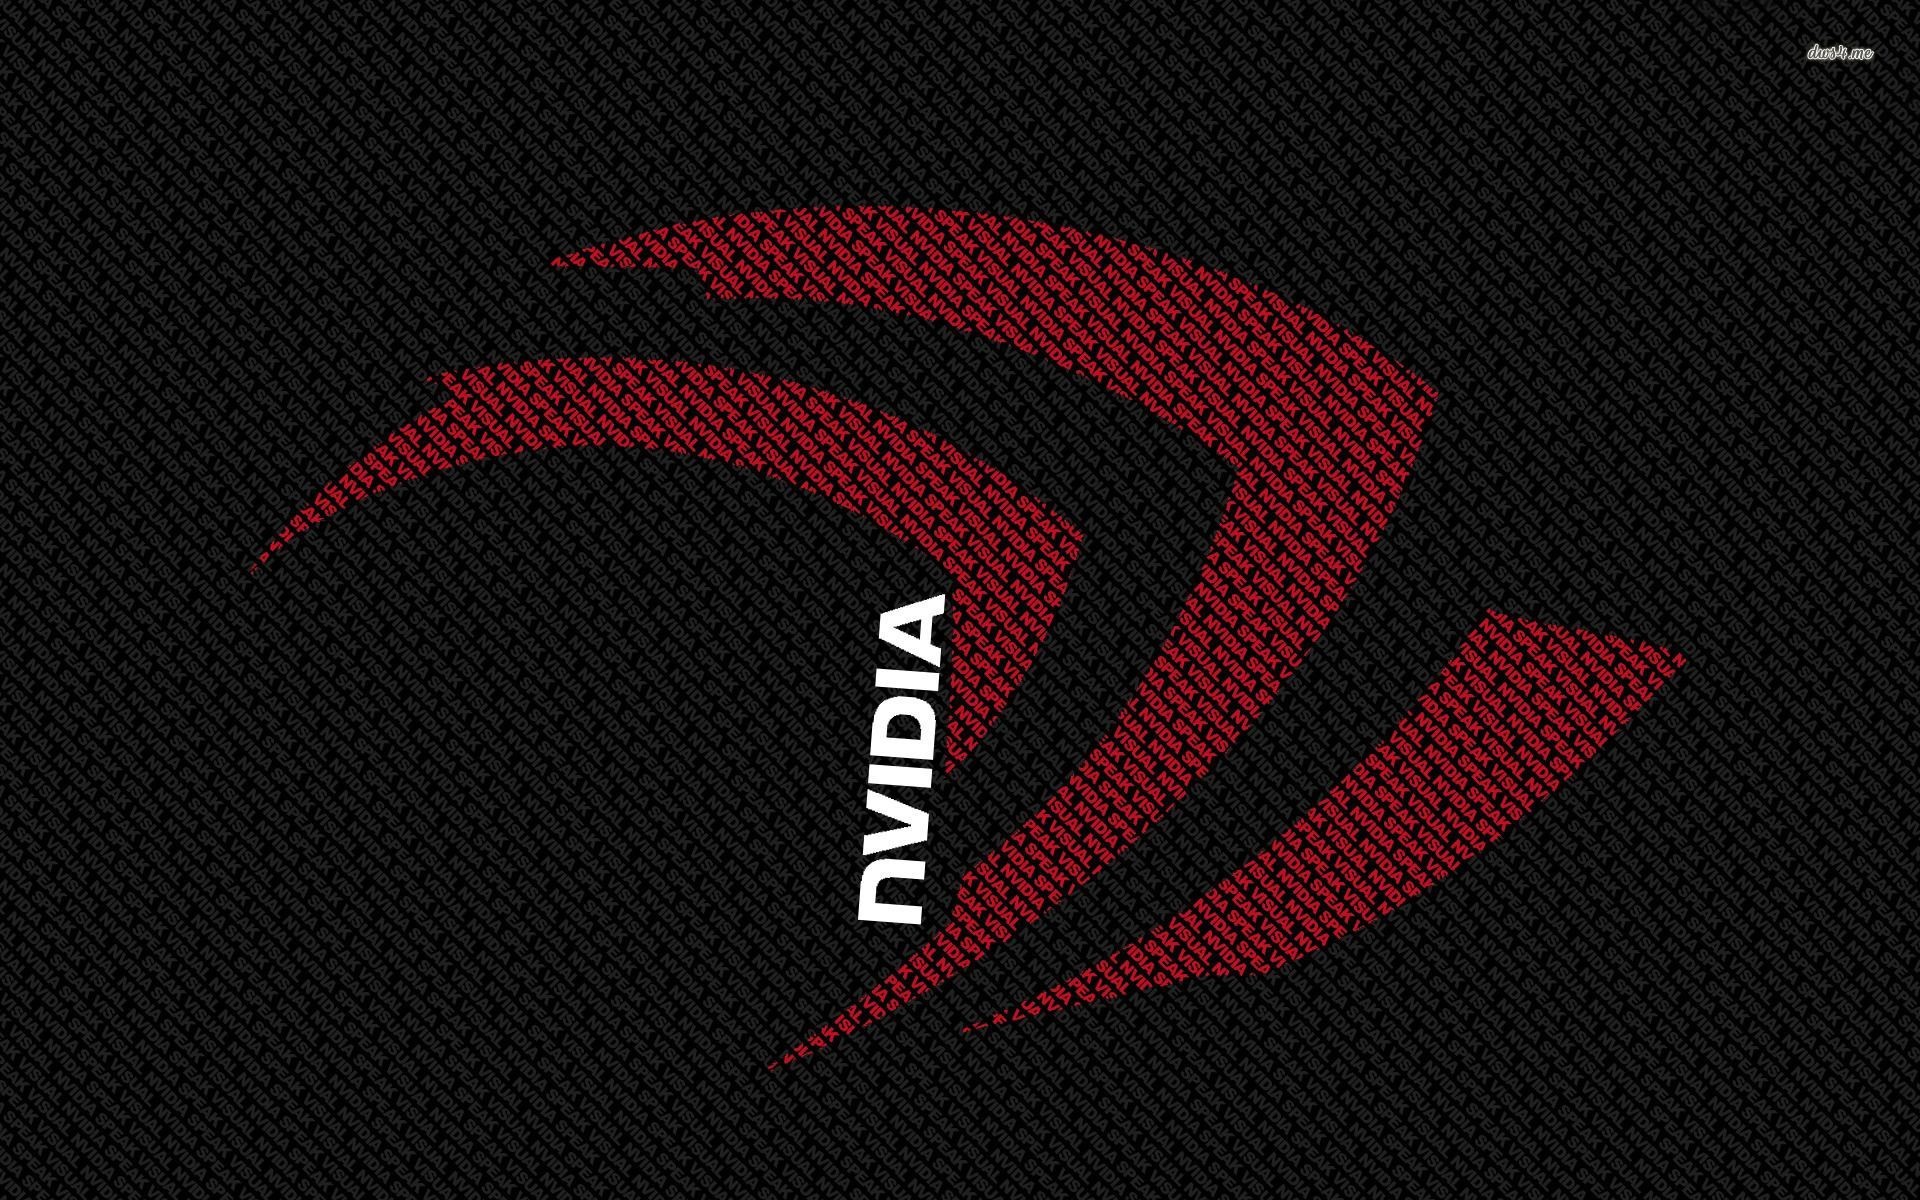 1920x1200 Red Nvidia HD Wallpaper | Places to Visit | Pinterest | Hd wallpaper .